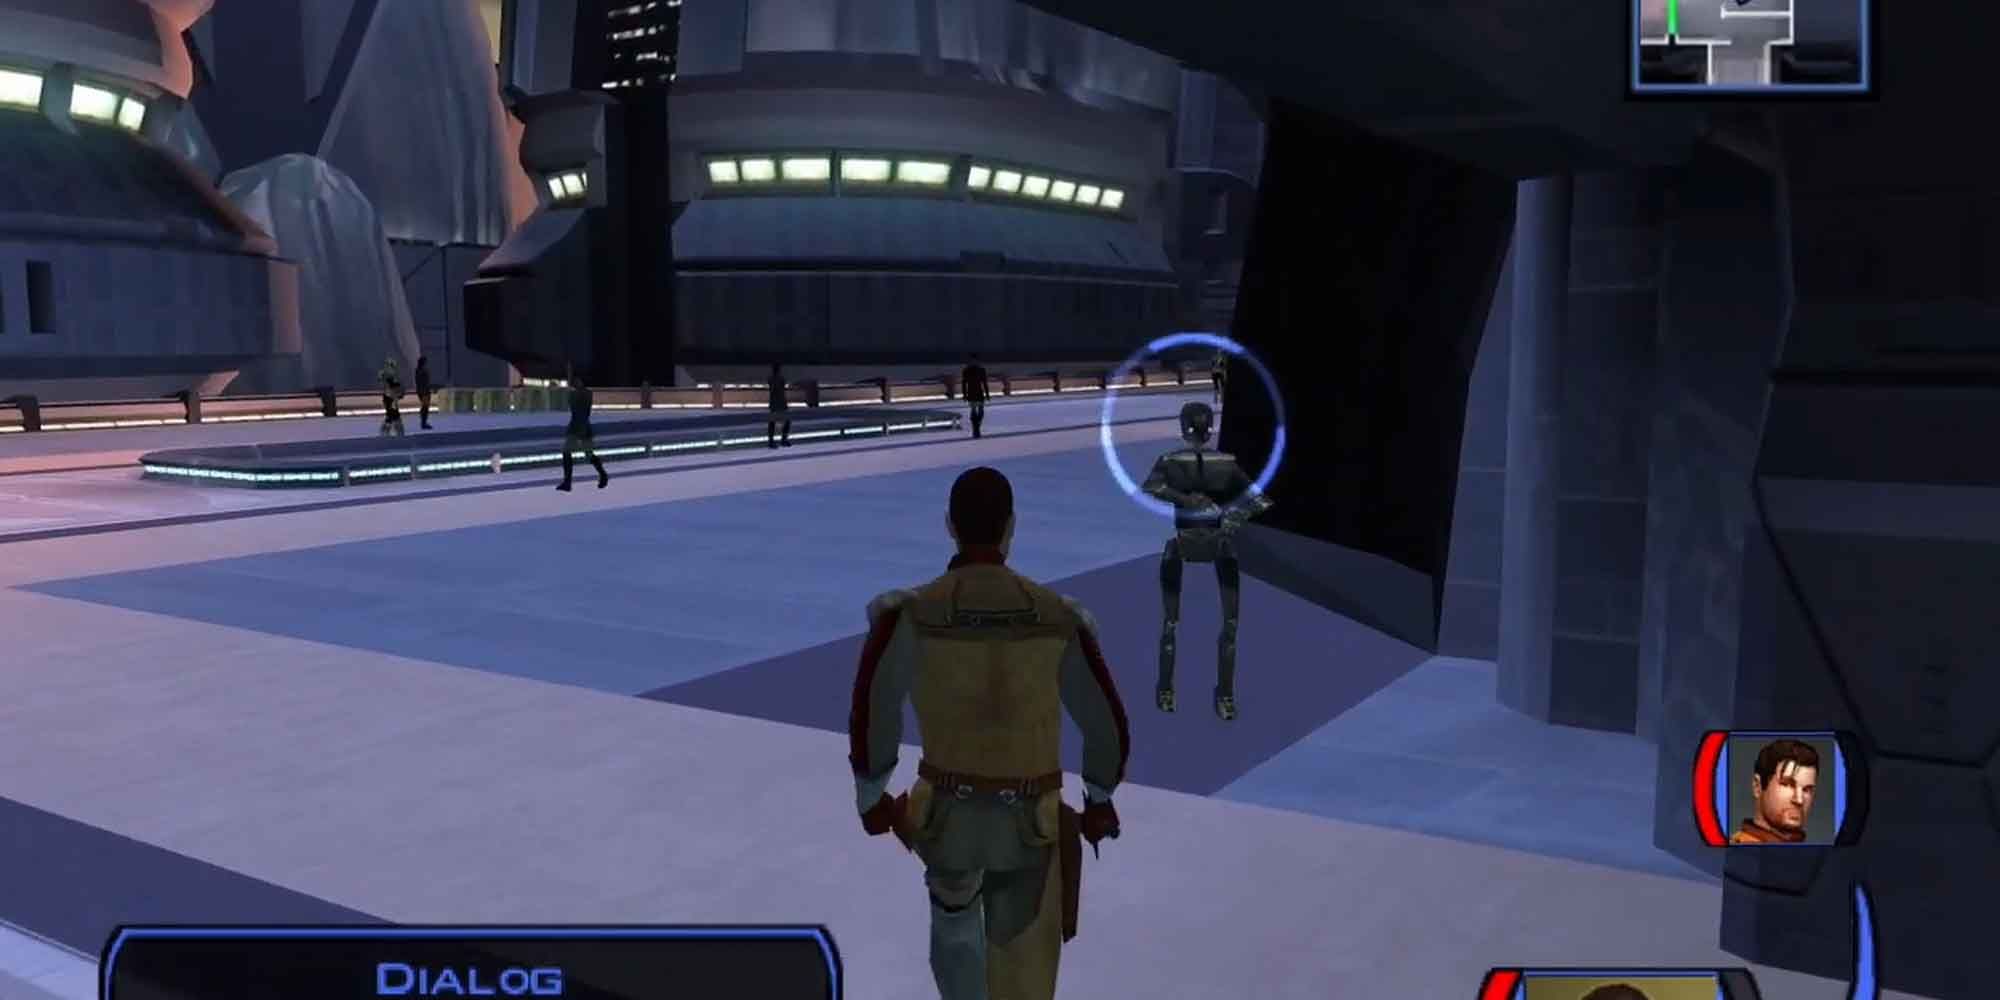 Targeting a protocol droid In KOTOR